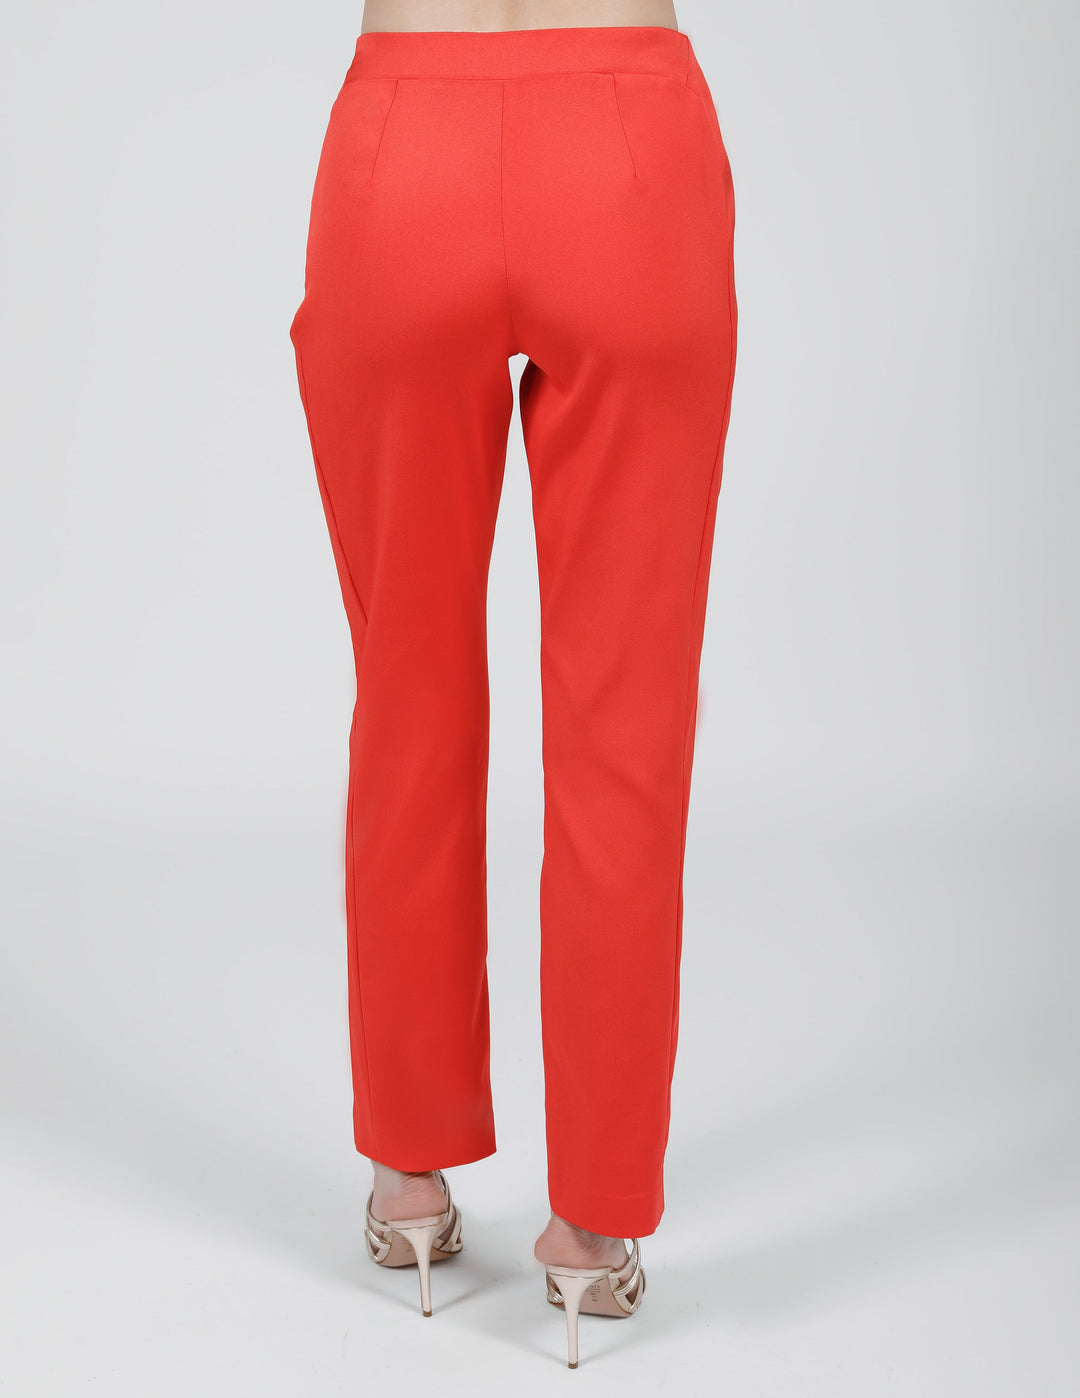 LIQUID SUITING PANT - SHIPS 2.28